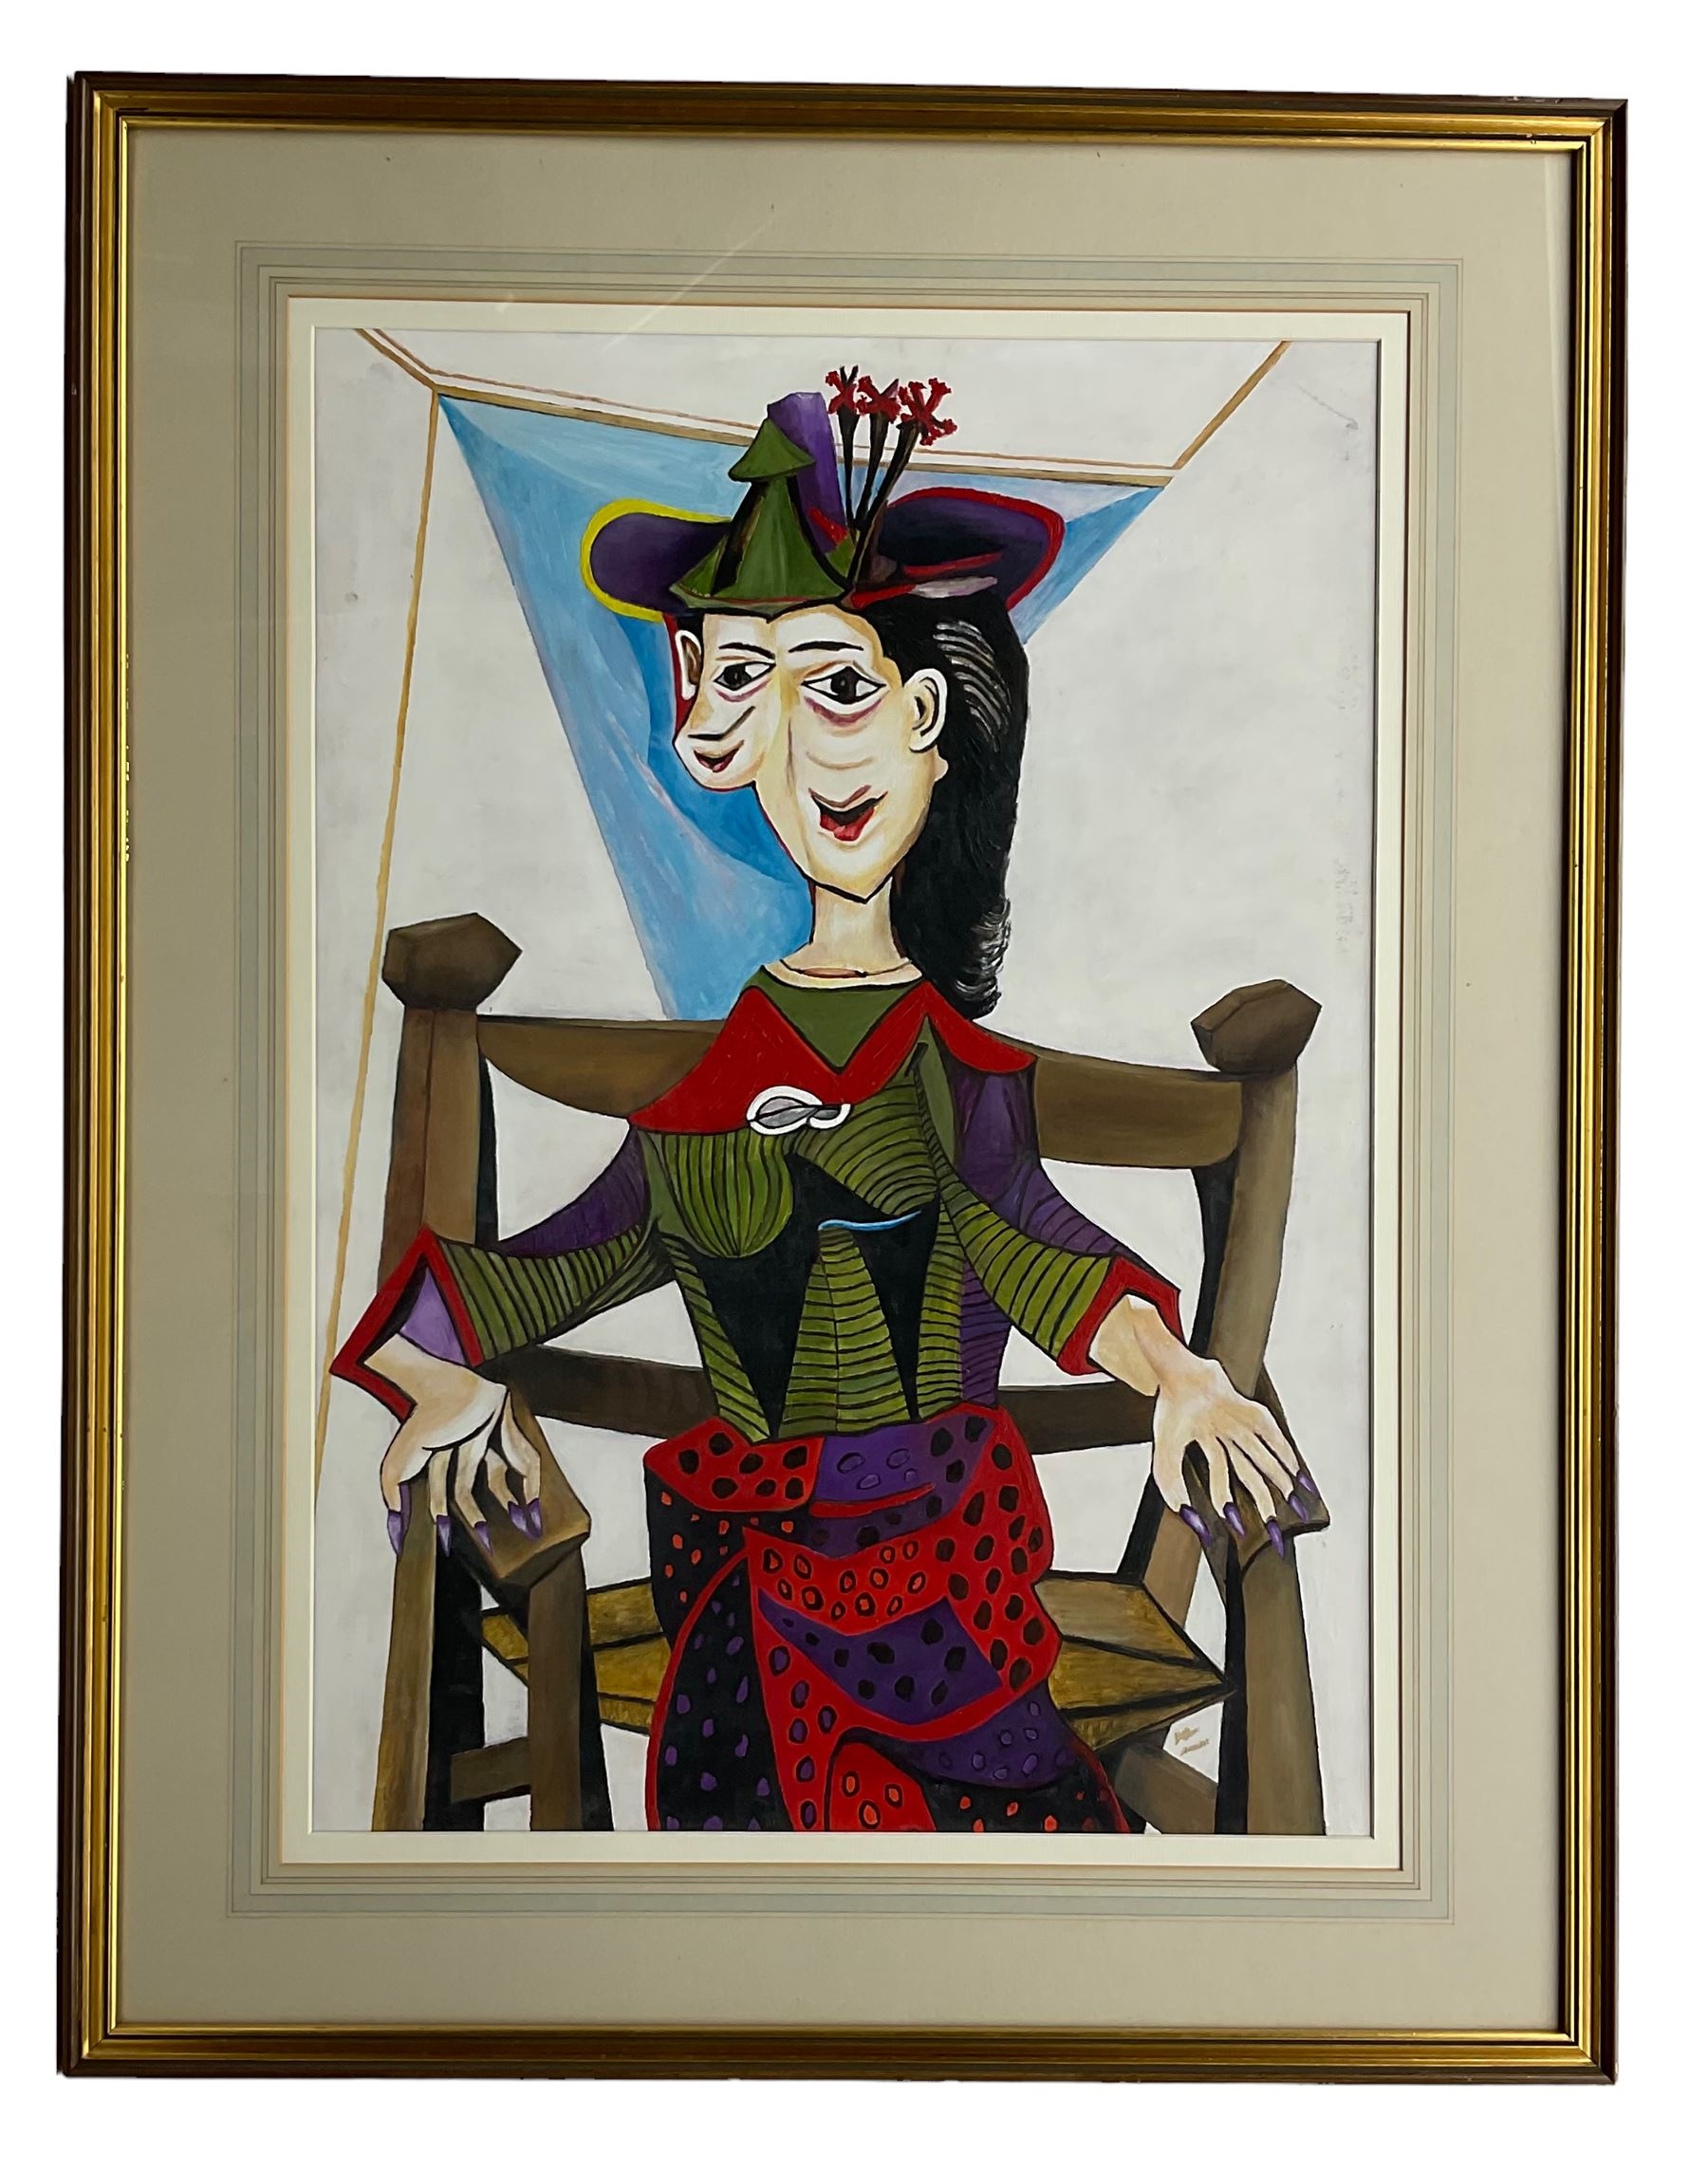 Artwork by Pablo Picasso, Dora Maar au Chat, Made of oil on board